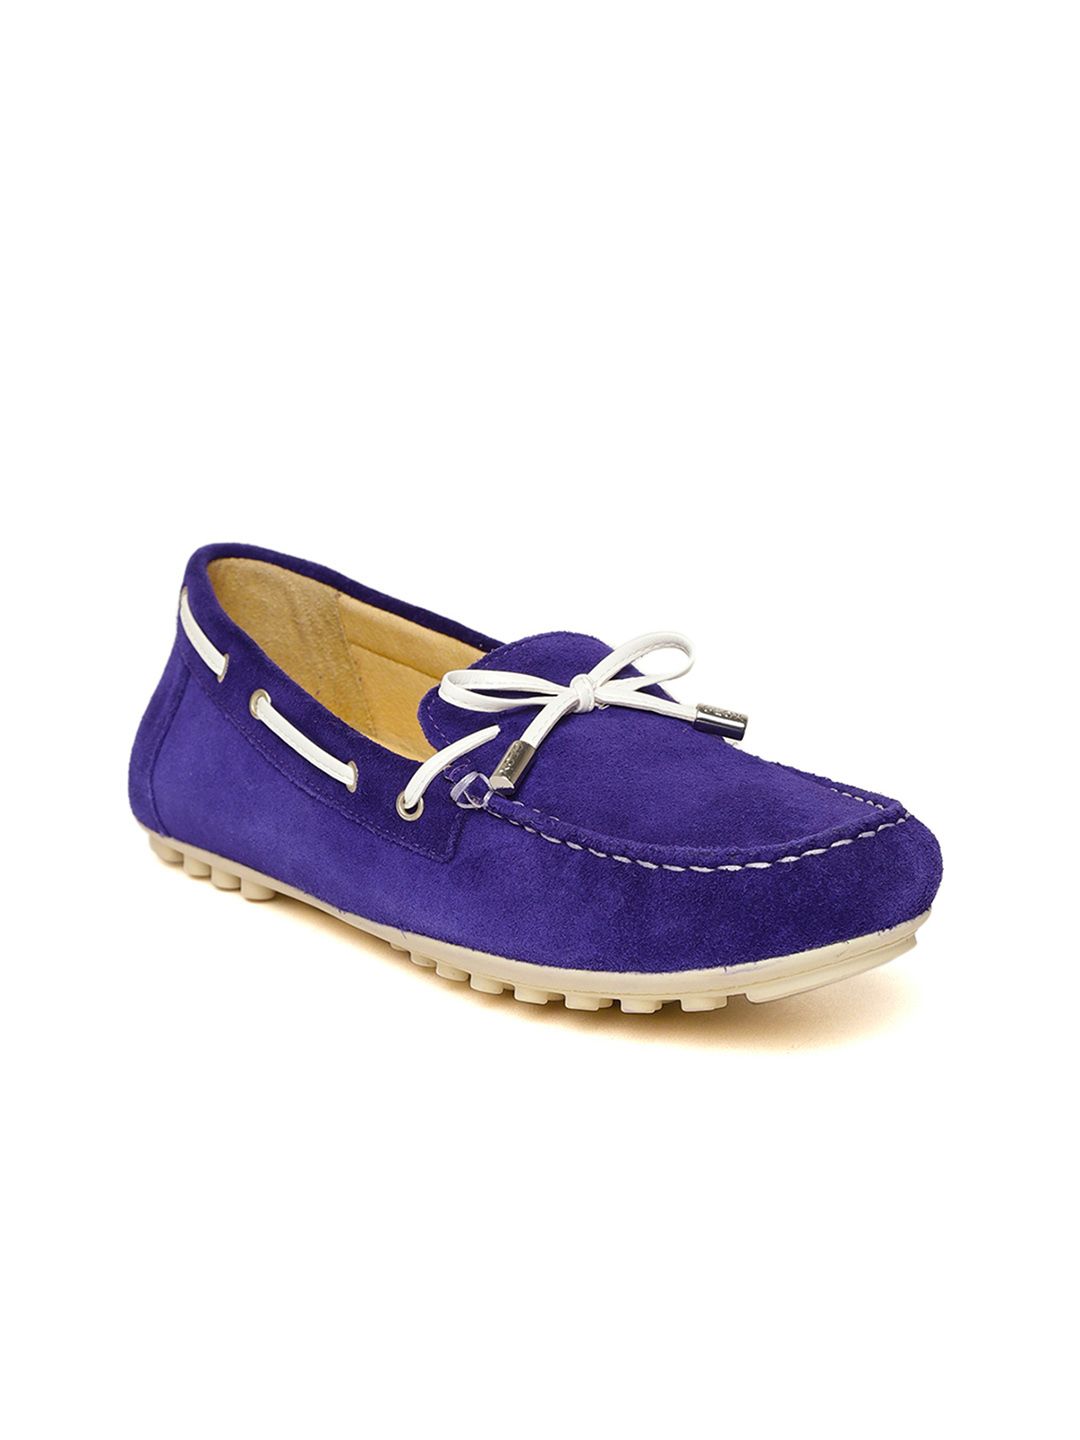 Geox Women Blue Solid Suede Boat Shoes Price in India